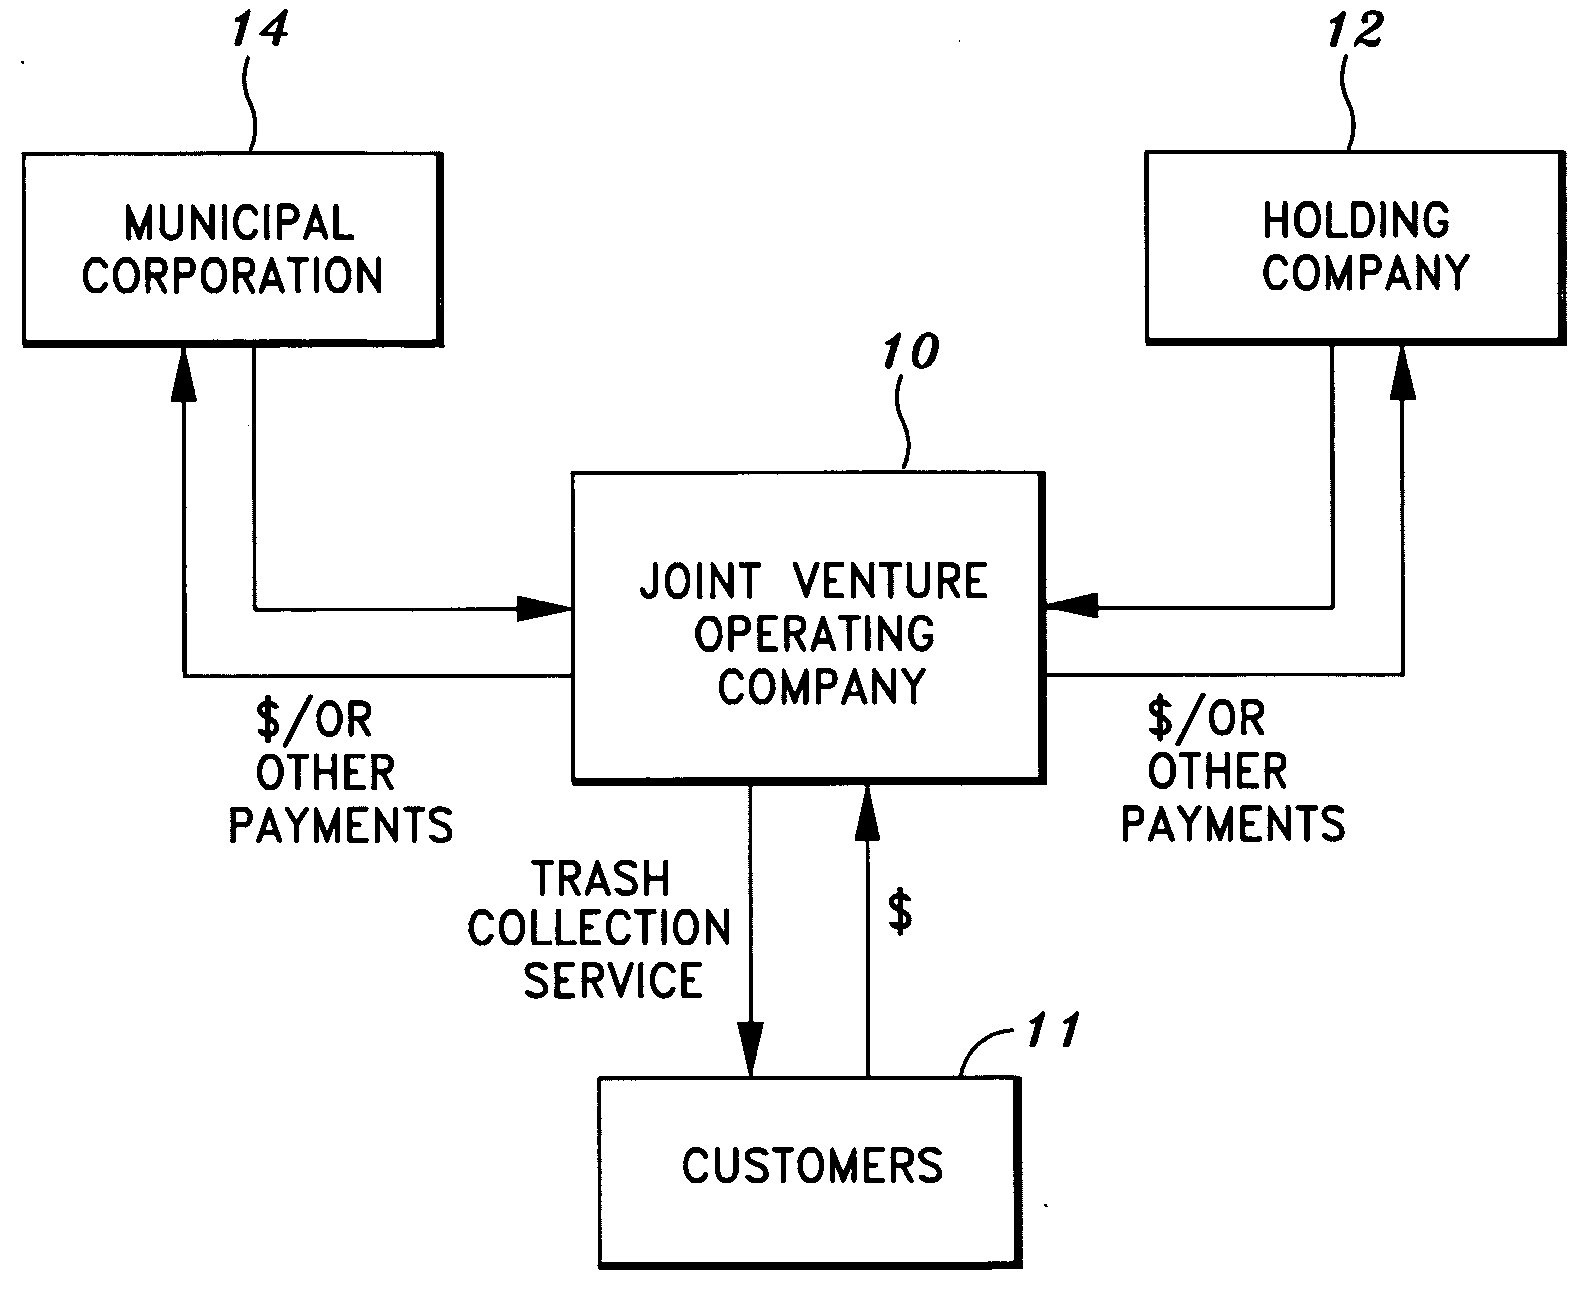 Method of conducting services on behalf of a governmental organization